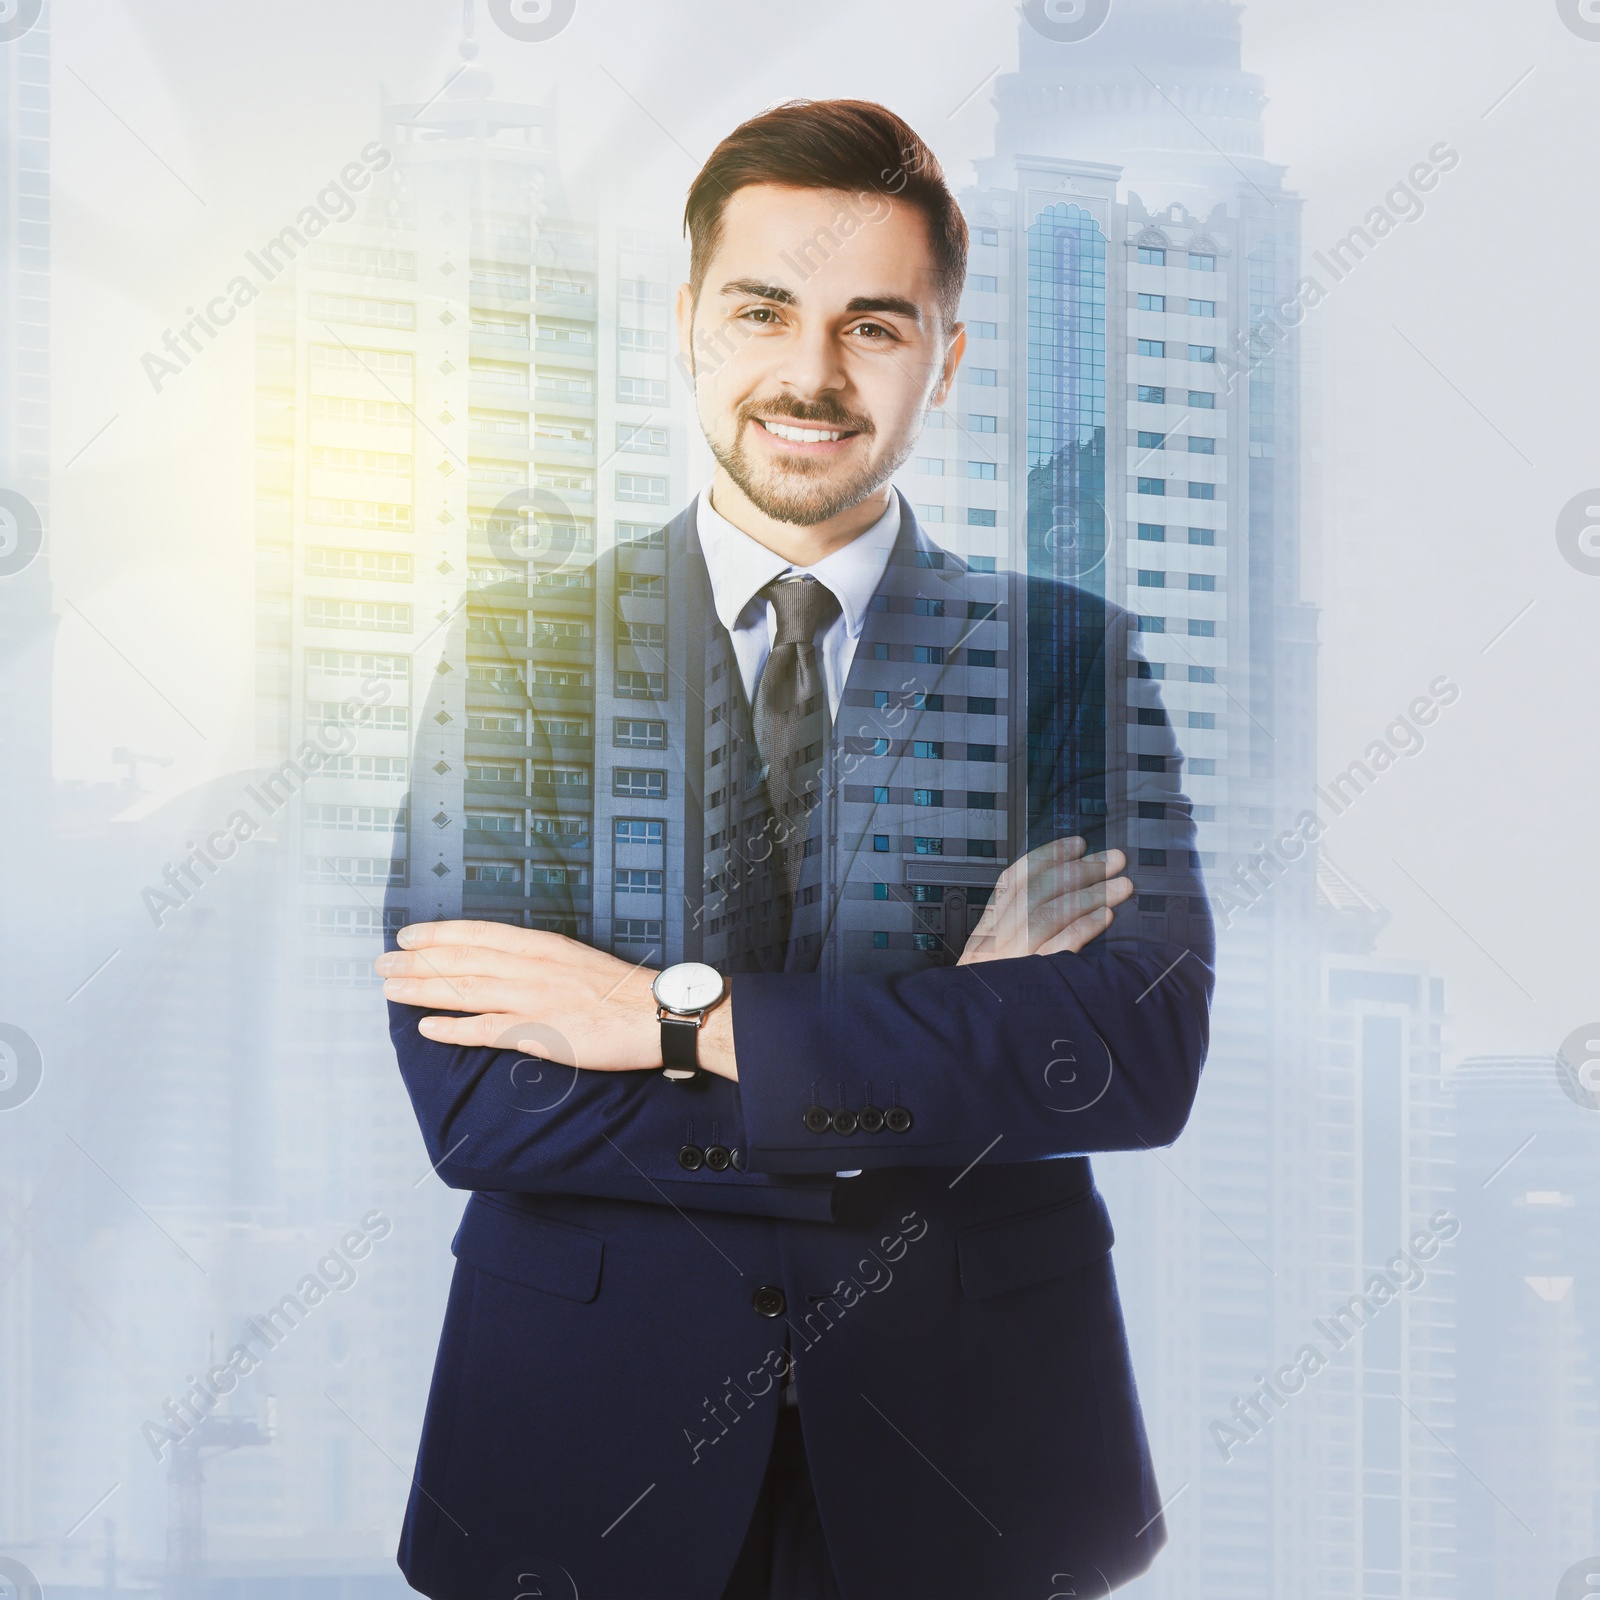 Image of Multiple exposure of confident architect and buildings